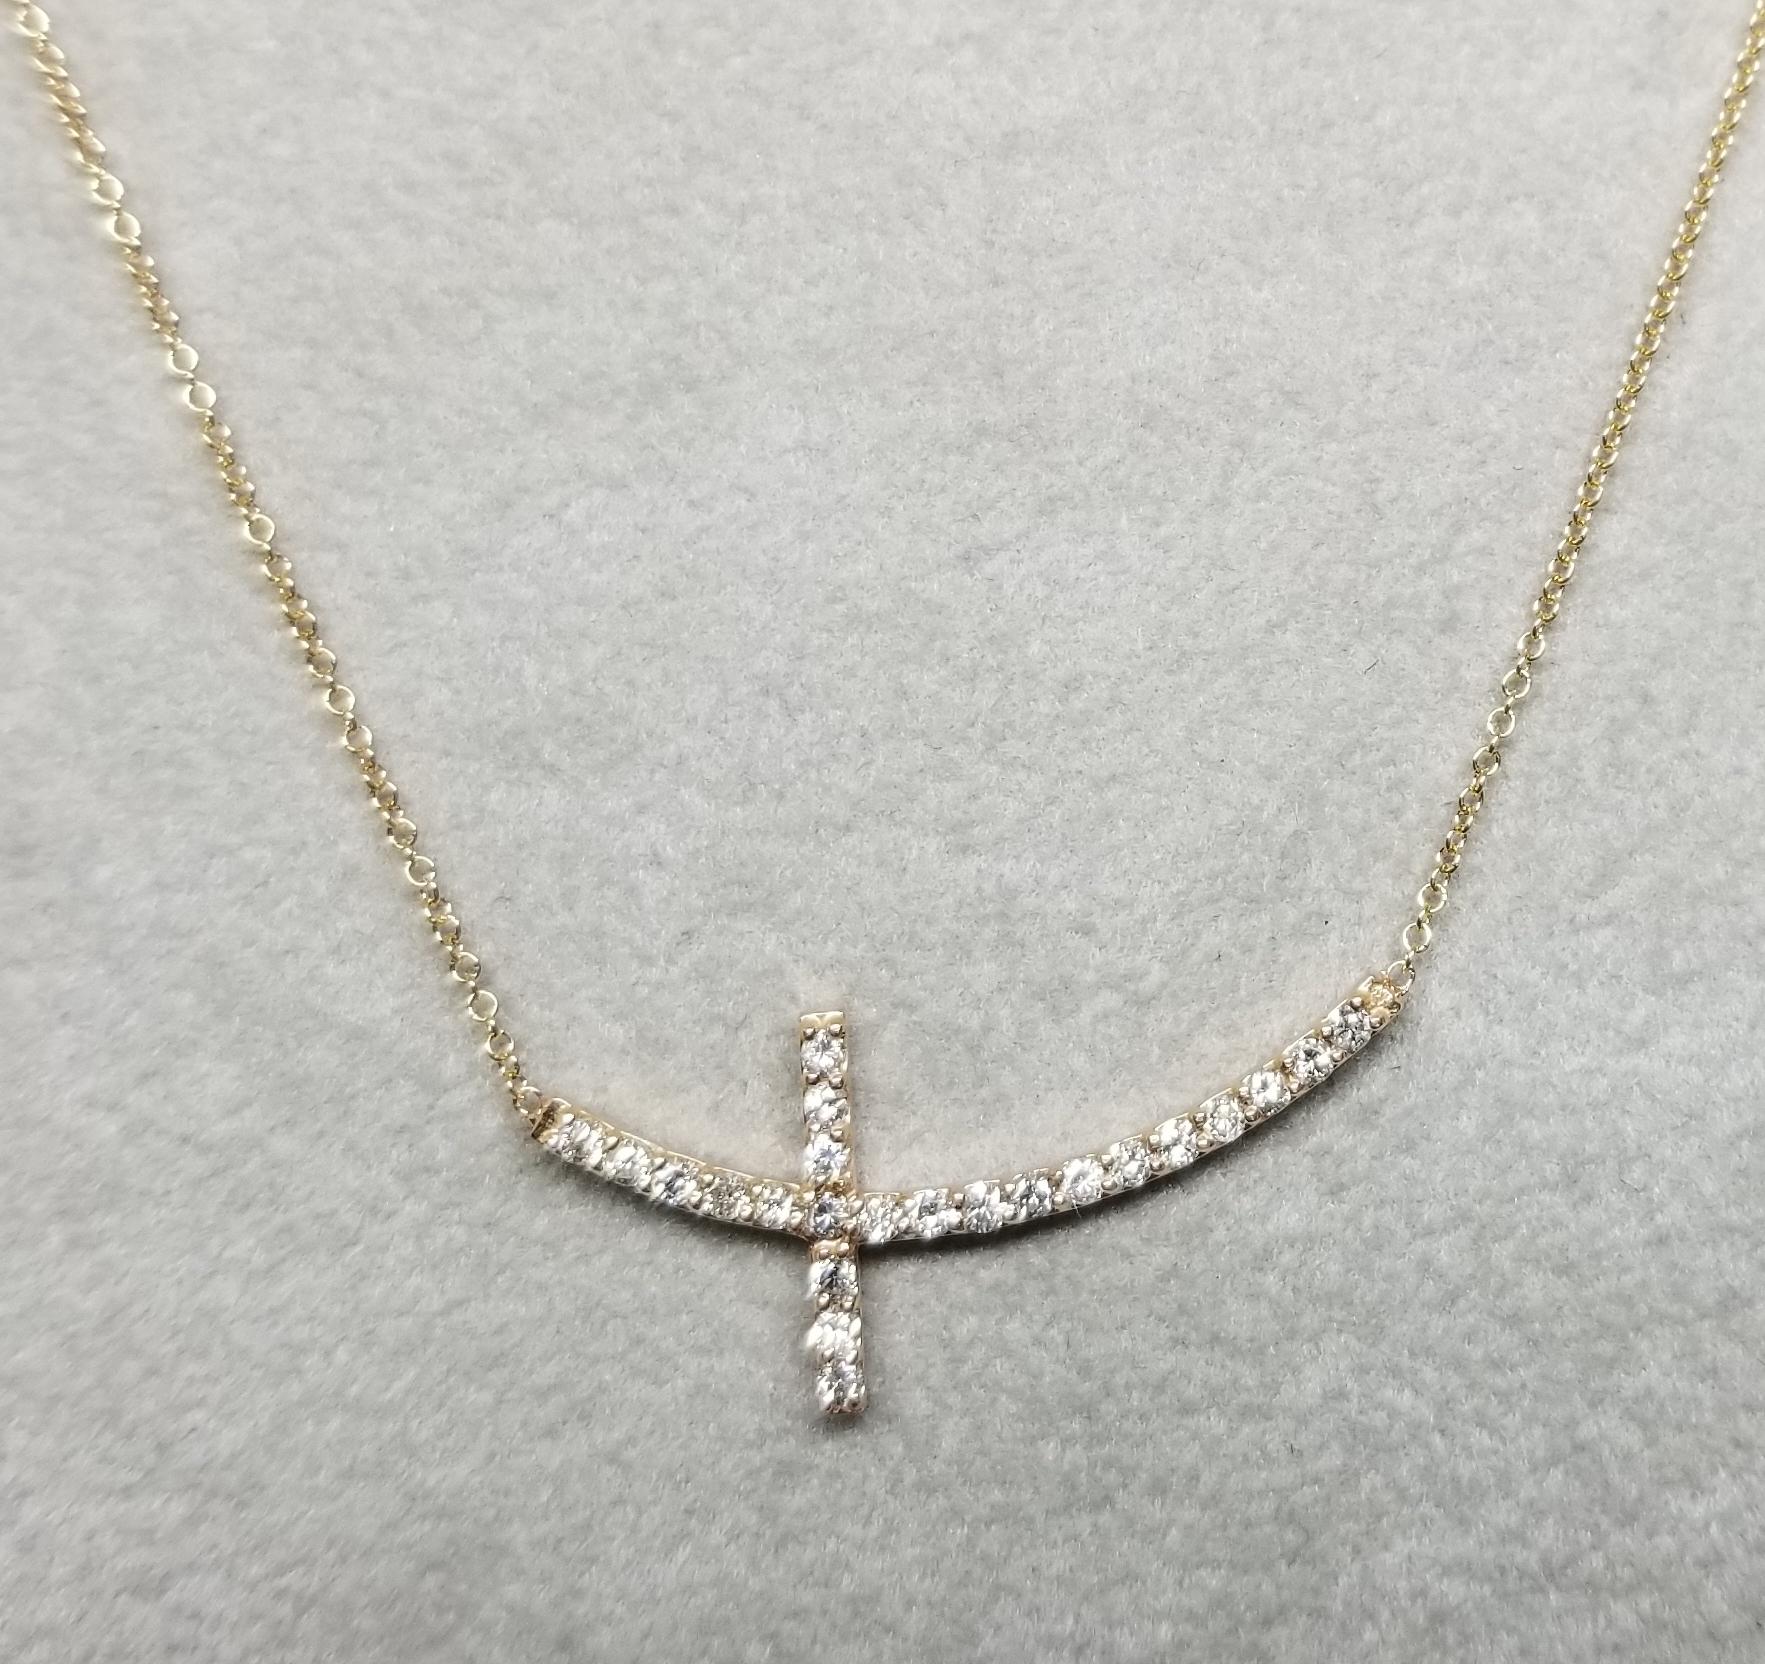  Specifications:
    main stone: ROUND CUT DIAMONDS
    diamonds: 23 PCS
    carat total weight: APPROX 0..40 CT
    color: G-H
    clarity: VS2
    brand: UNBRANDED
    metal: 14K ROSE GOLD
    type: PENDANT/NECKLACE
    weight: 2.40  GrS
   